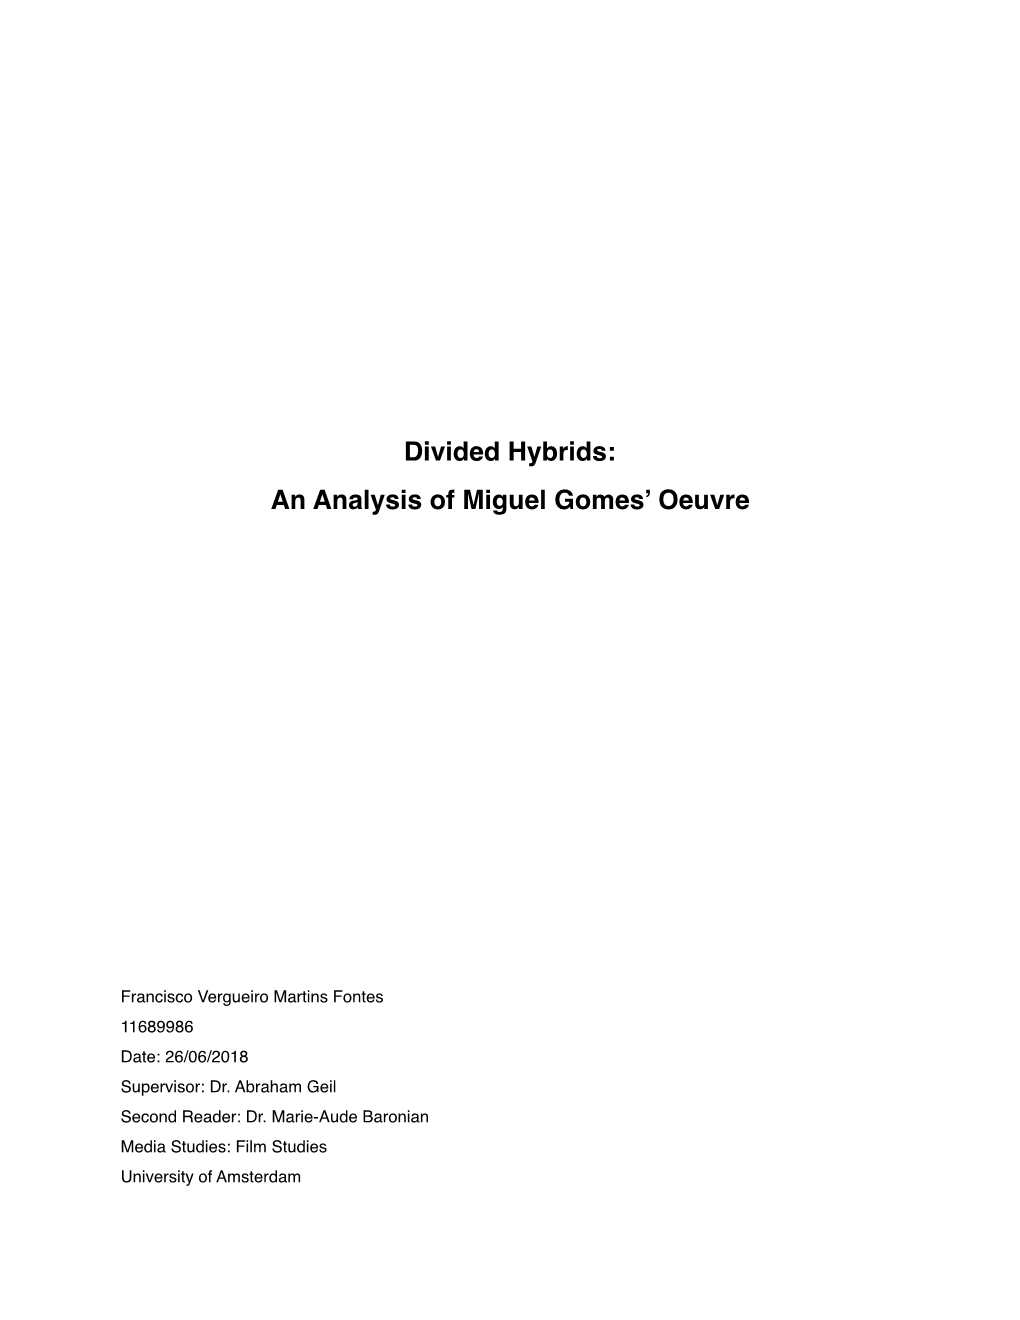 An Analysis of Miguel Gomes' Oeuvre